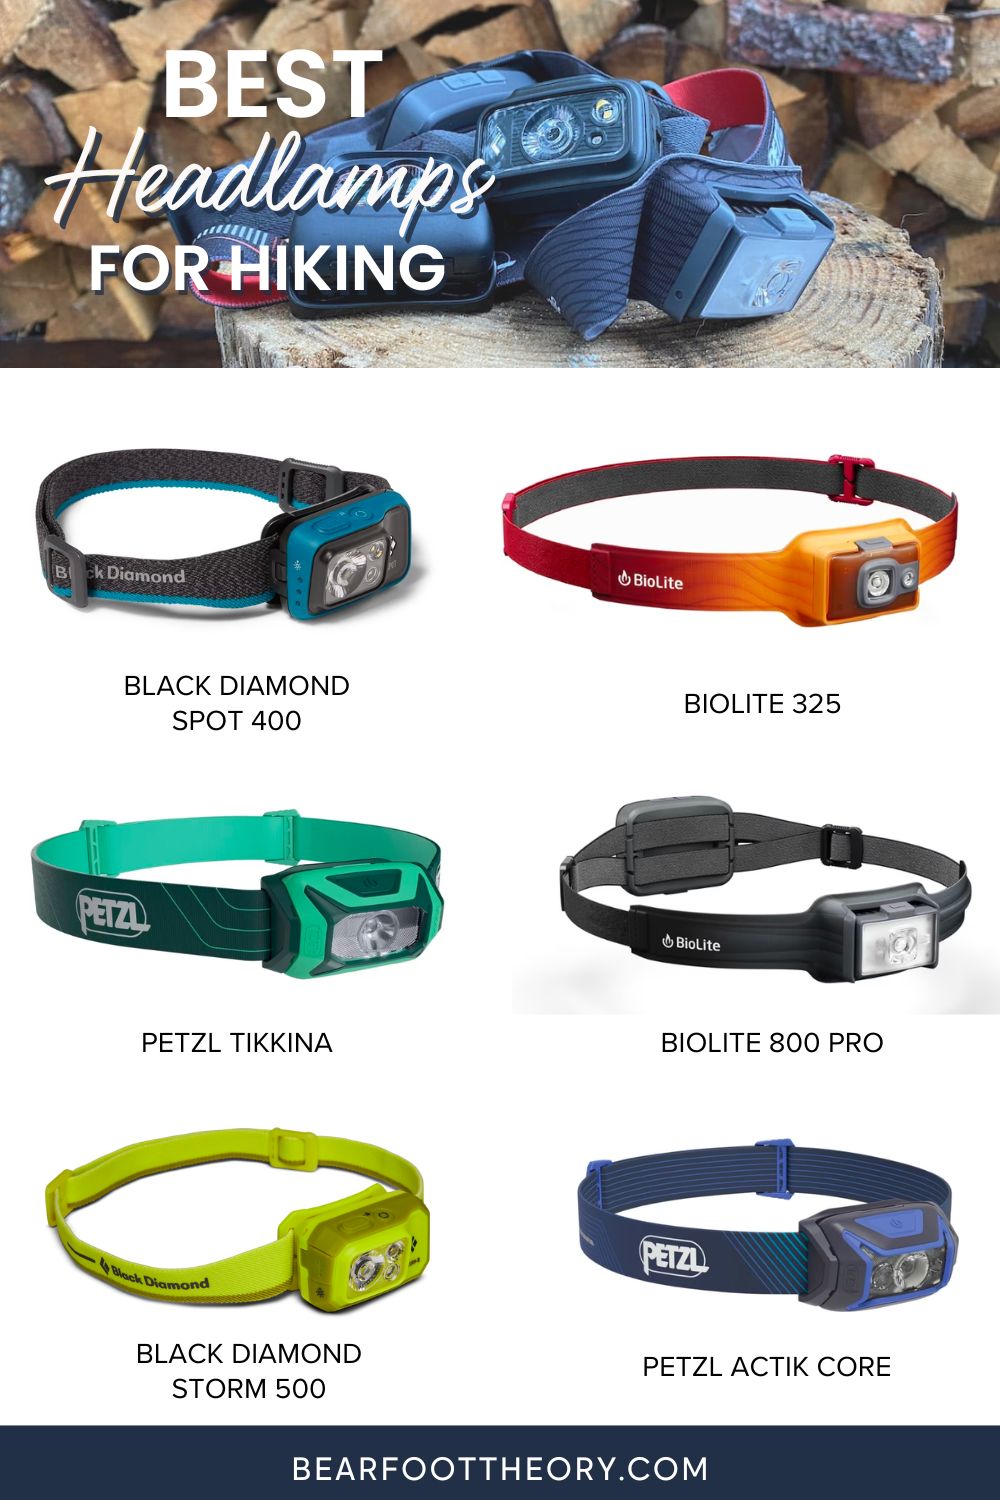 Looking for the perfect headlamp for your next outdoor adventure? We've got you covered! We've put together a list of the best headlamps for hiking and camping, including options for every budget and need. Whether you're a serious hiker or just love camping under the stars, these headlamps will help you stay safe and see everything the great outdoors has to offer. So grab your backpack and check out our top picks!